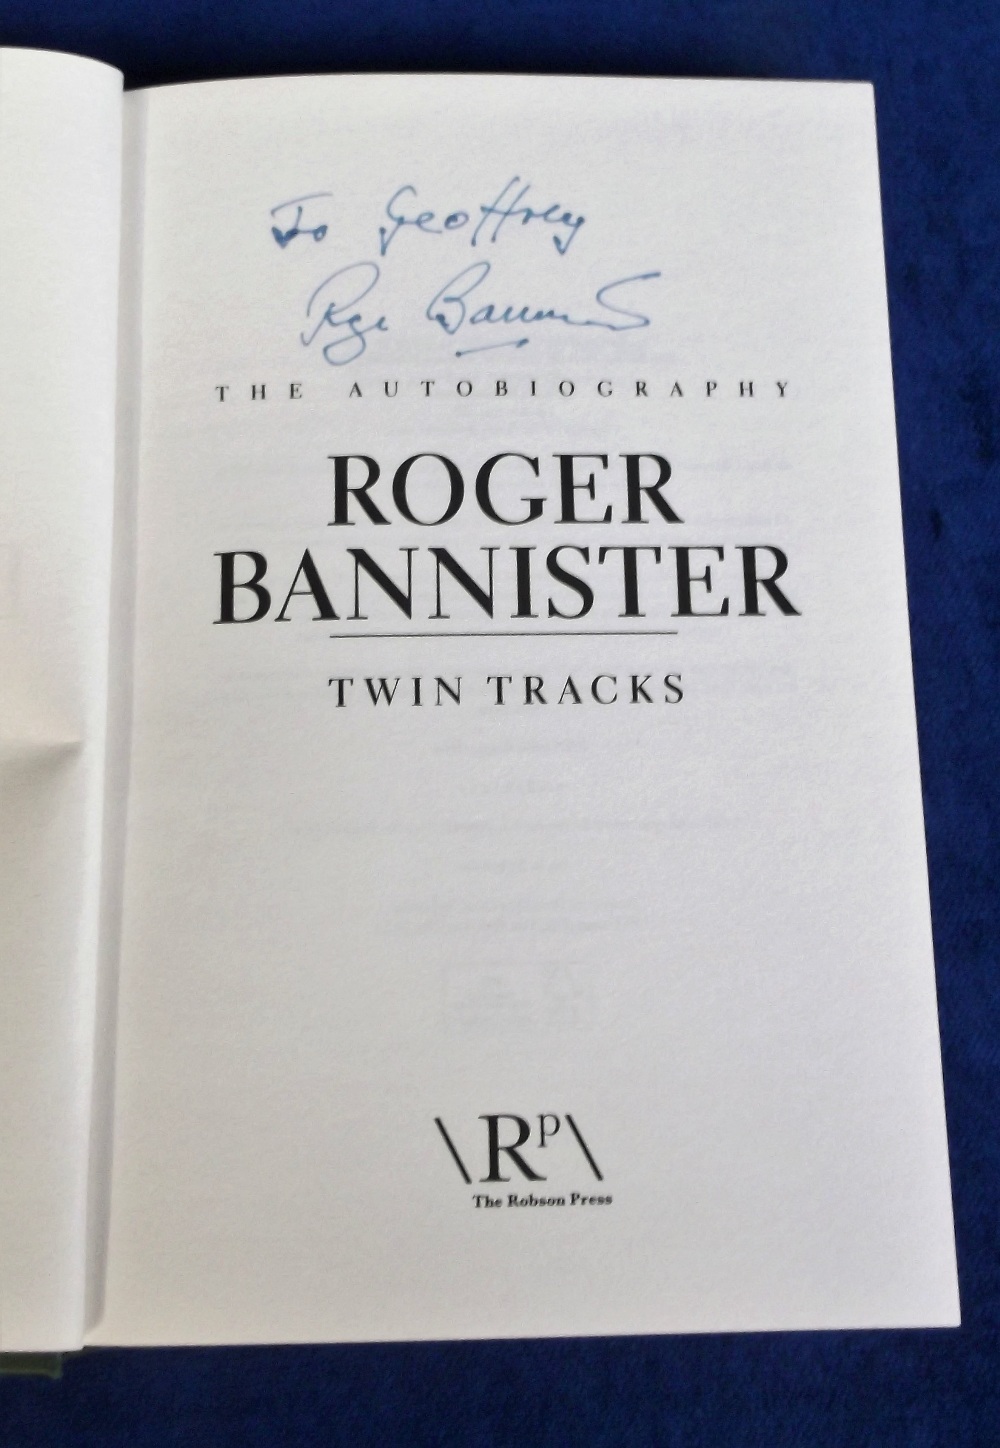 Autographed book, Roger Bannister autobiography 'Twin Tracks', first edition 2014, with